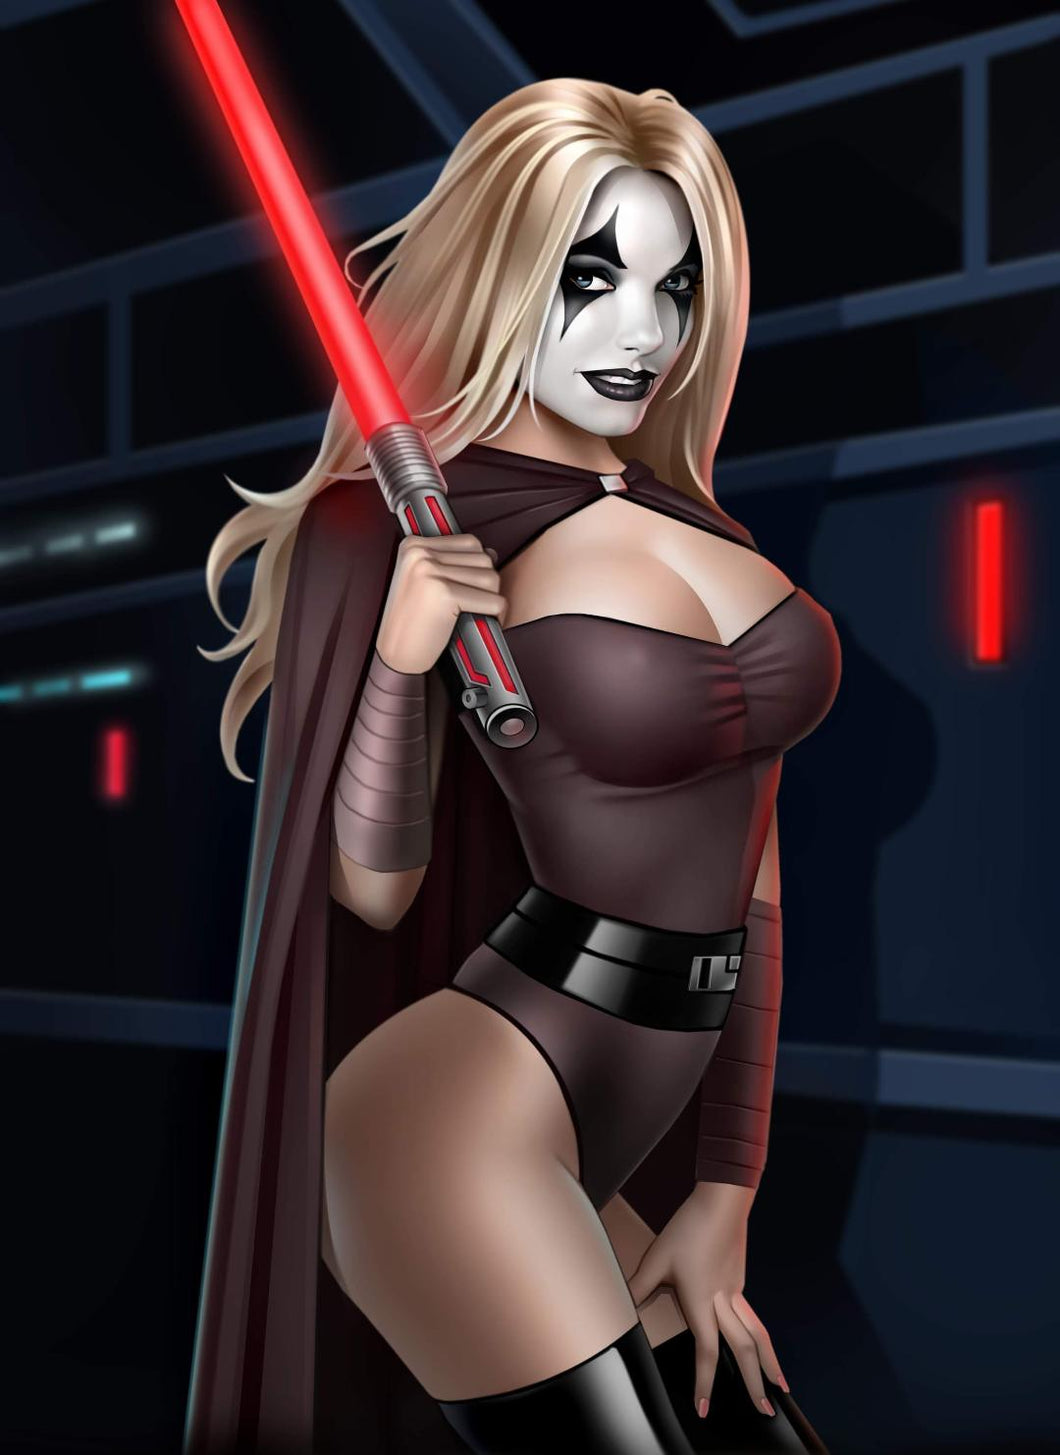 Totally Rad Wars #3 Silence Red Lightsaber Star Wars Cosplay Nice & Naughty 2 Book Variant Cover Set by Keith Garvey